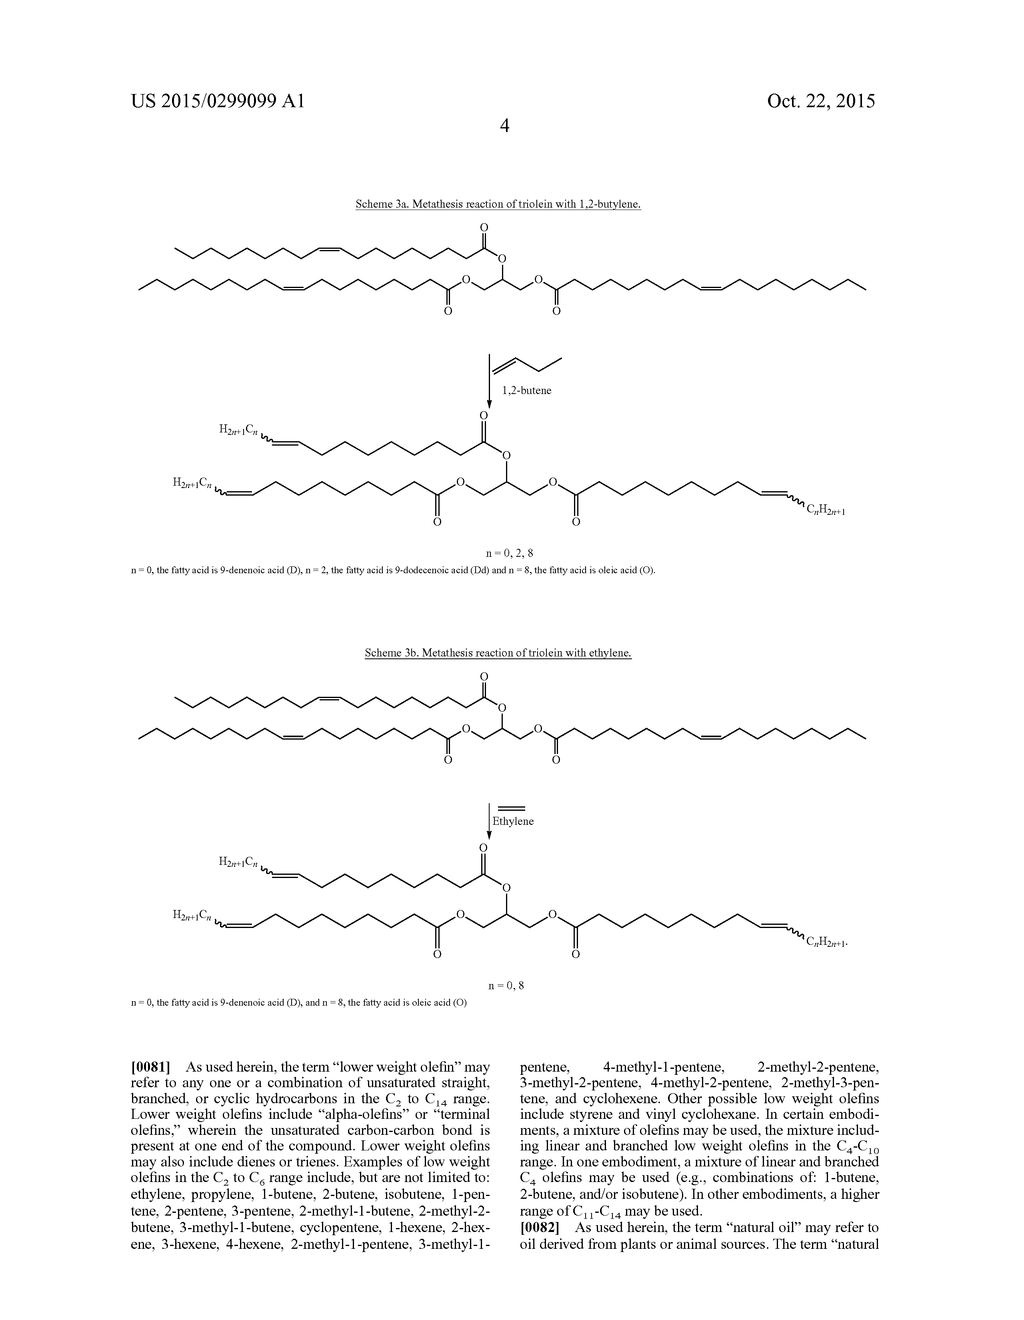 CERTAIN METATHESIZED NATURAL OIL TRIACYLGLYCEROL POLYOLS FOR USE IN     POLYURETHANE APPLICATIONS AND THEIR RELATED PROPERTIES - diagram, schematic, and image 35